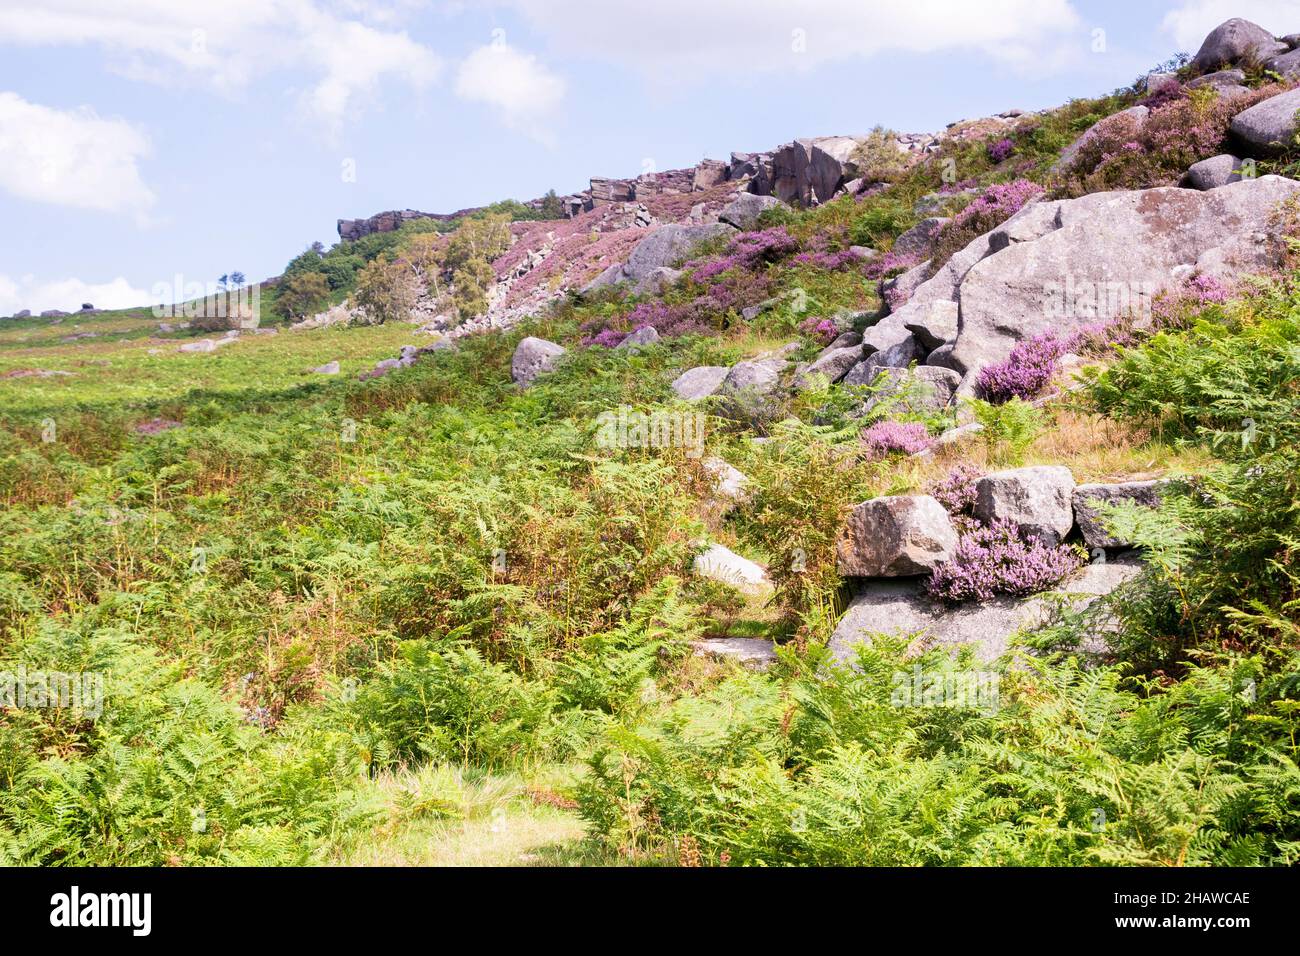 The beautiful Peak District with pink flowering heather on a rock overlooking the moorland landscape Stock Photo